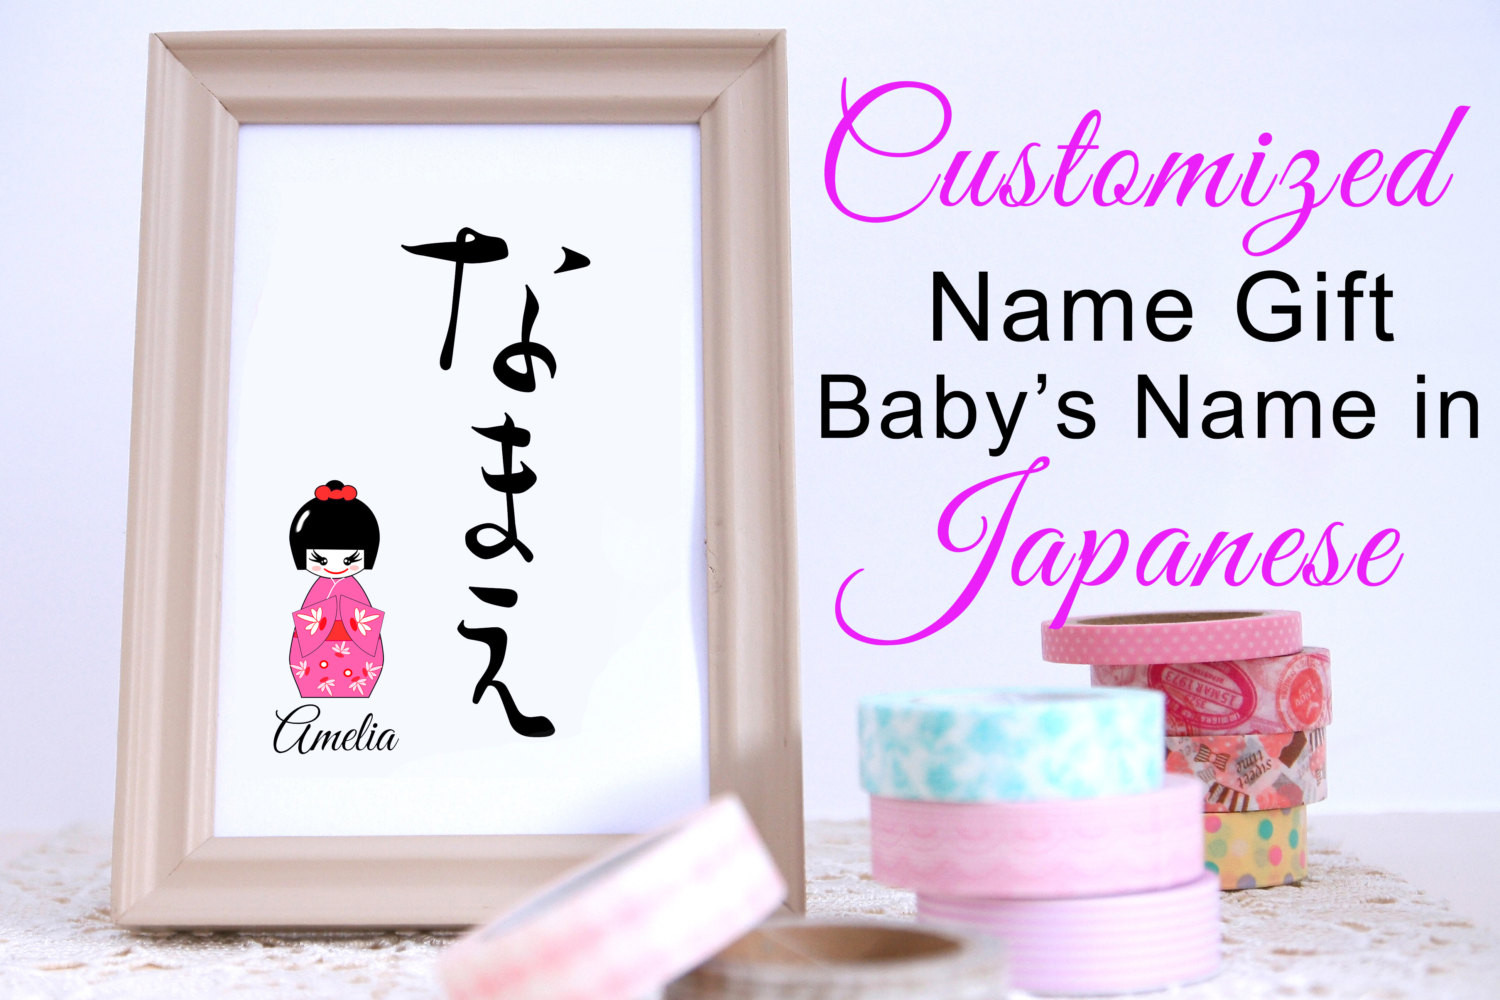 Baby Name Gifts Personalized
 Personalized New Baby Gifts for Baby Girl Baby Name Gifts for